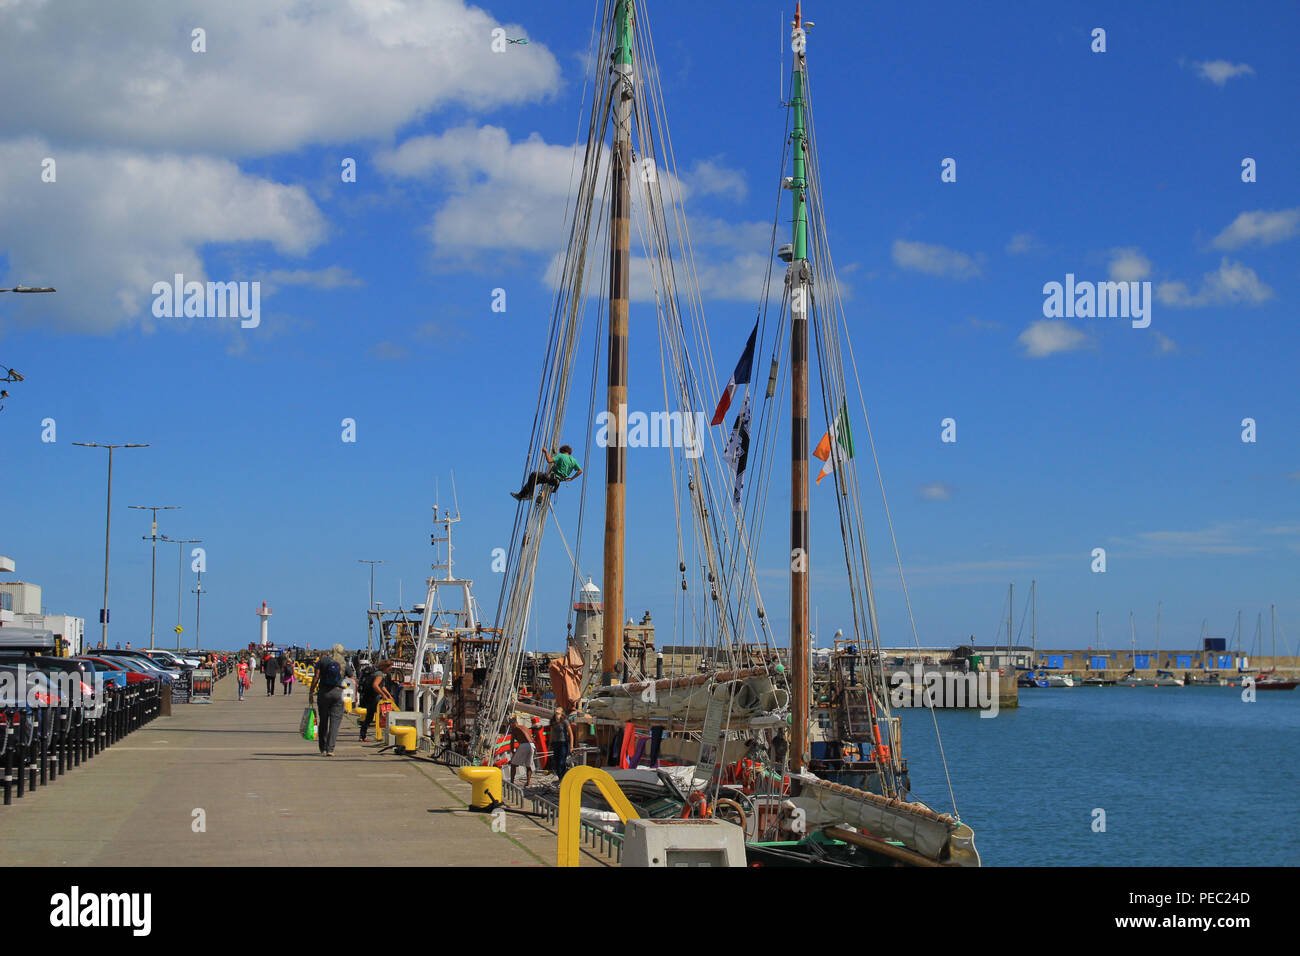 A busy morning on the west Pier Howth, Ireland with people stroling the pier and a man repairing the rigging ropes on a visiting french sail ship. Stock Photo